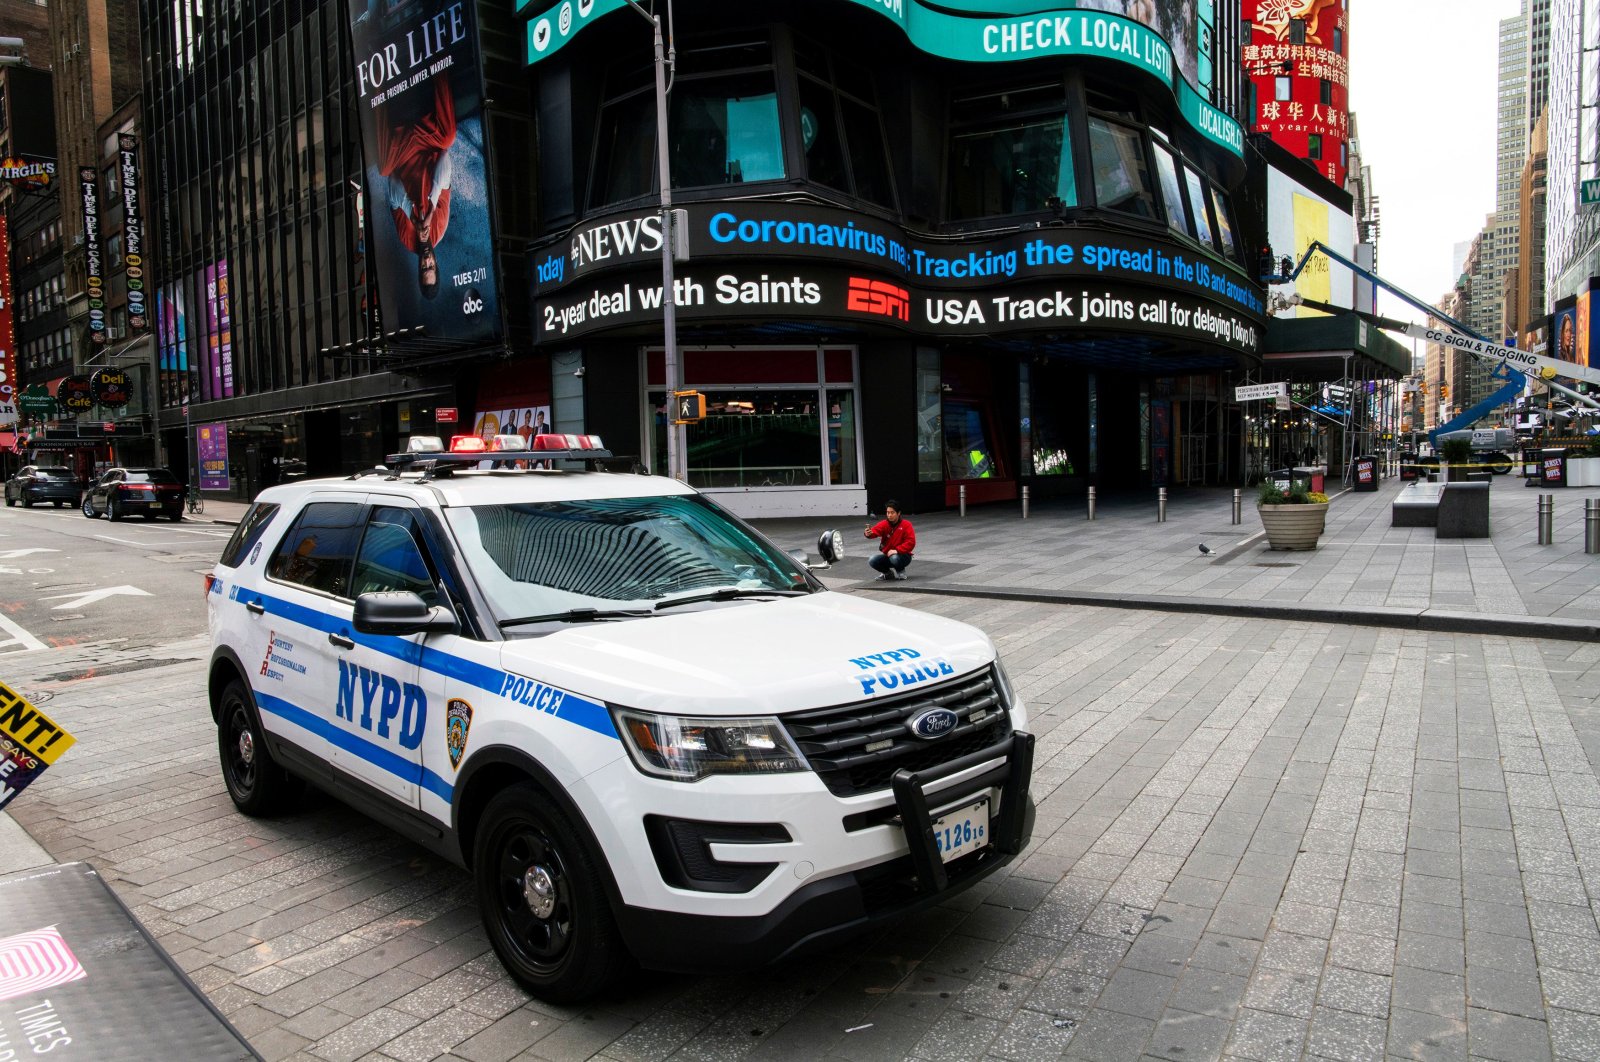 A NYPD police car stand guard at Times Square as the coronavirus disease (COVID-19) outbreak continues in New York, U.S., March 21, 2020. (Reuters Photo)